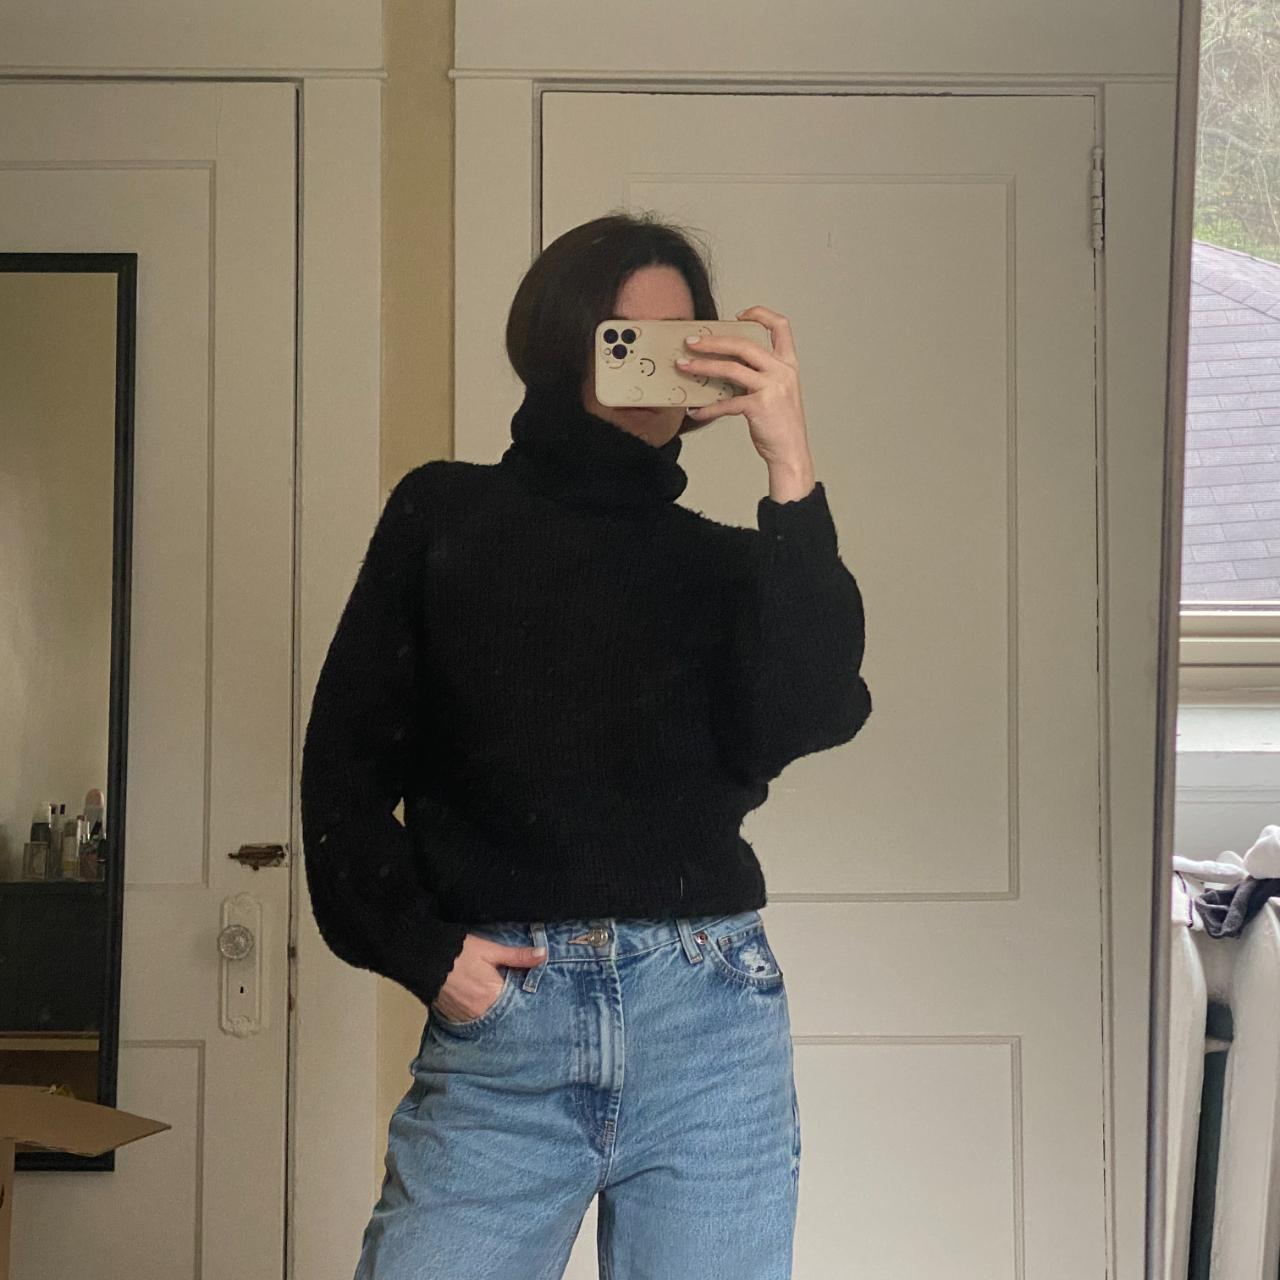 PETER DO - Archived Ripped Wide Leg Jeans - Depop